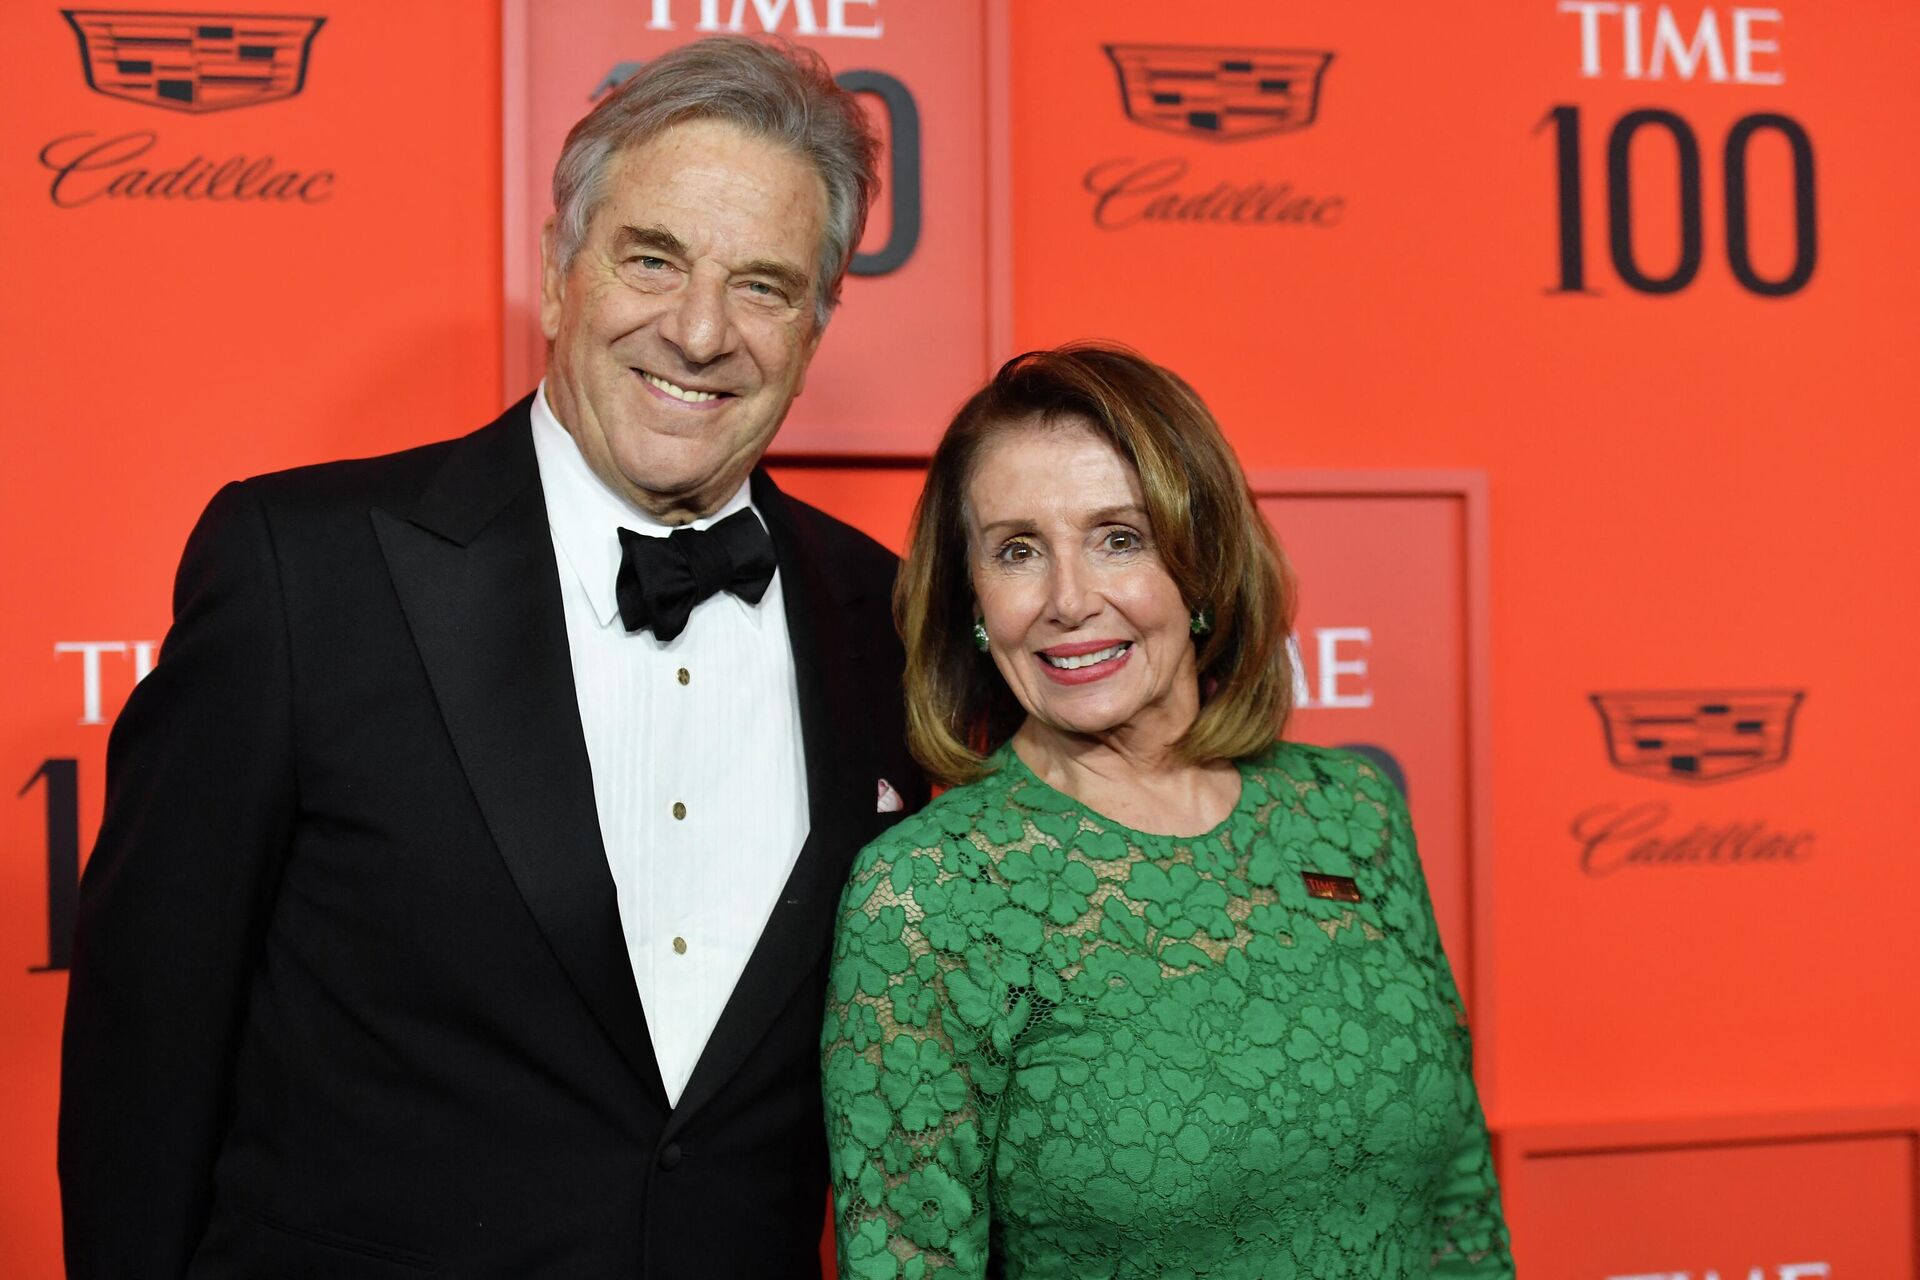 In this file photo taken on April 23, 2019,  US Speaker of the House of Representatives Nancy Pelosi (R) and husband Paul Pelosi arrive for the Time 100 Gala at Lincoln Center in New York. - Sputnik International, 1920, 05.11.2022